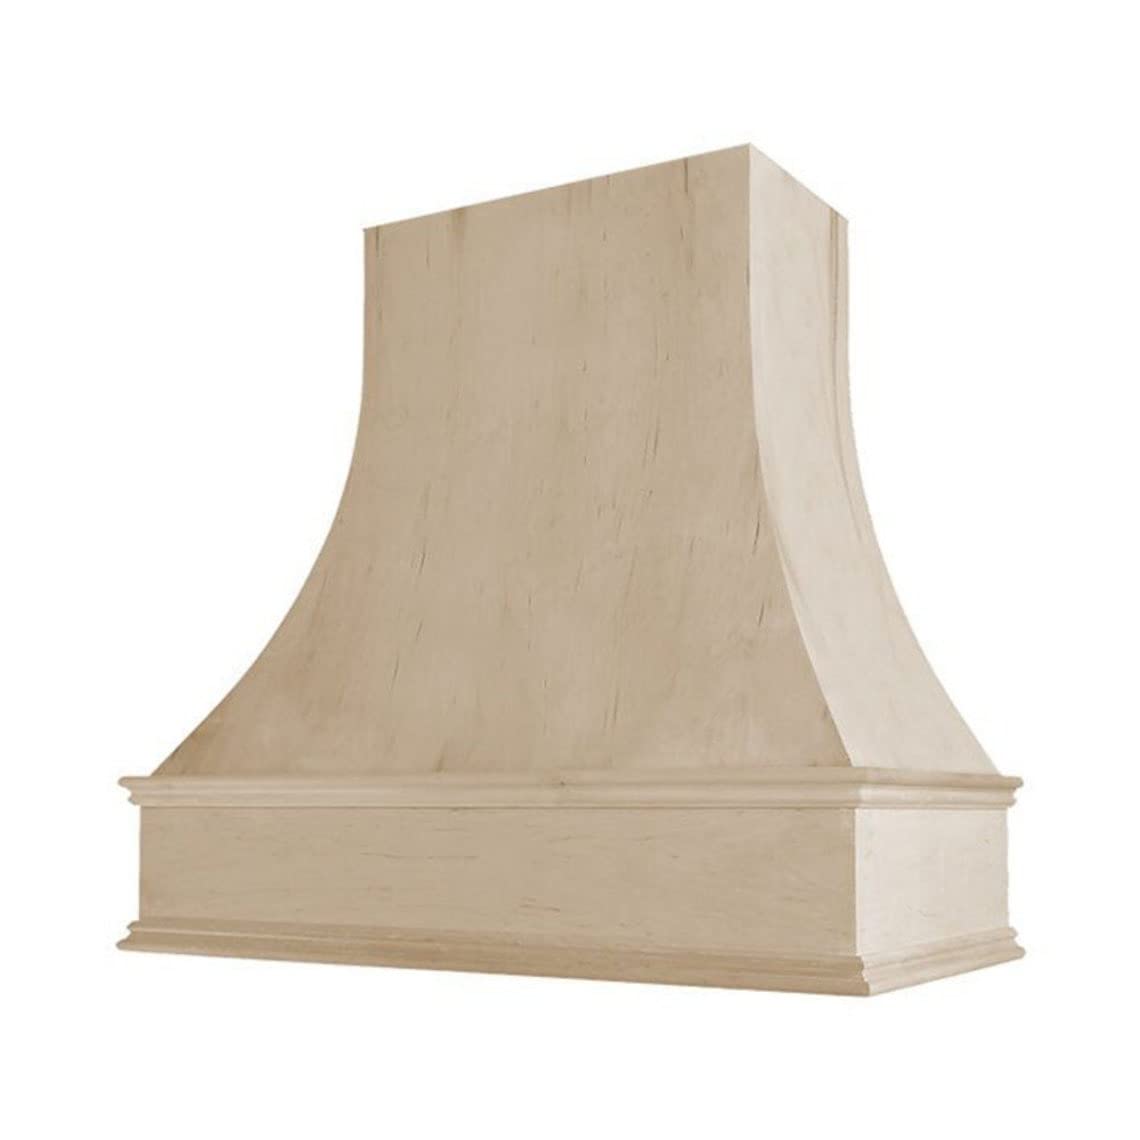 Riley & Higgs curved Front Unfinished Range Hood cover With Decorative Molding - Wall Mounted Wood Range Hood covers, Plywood an